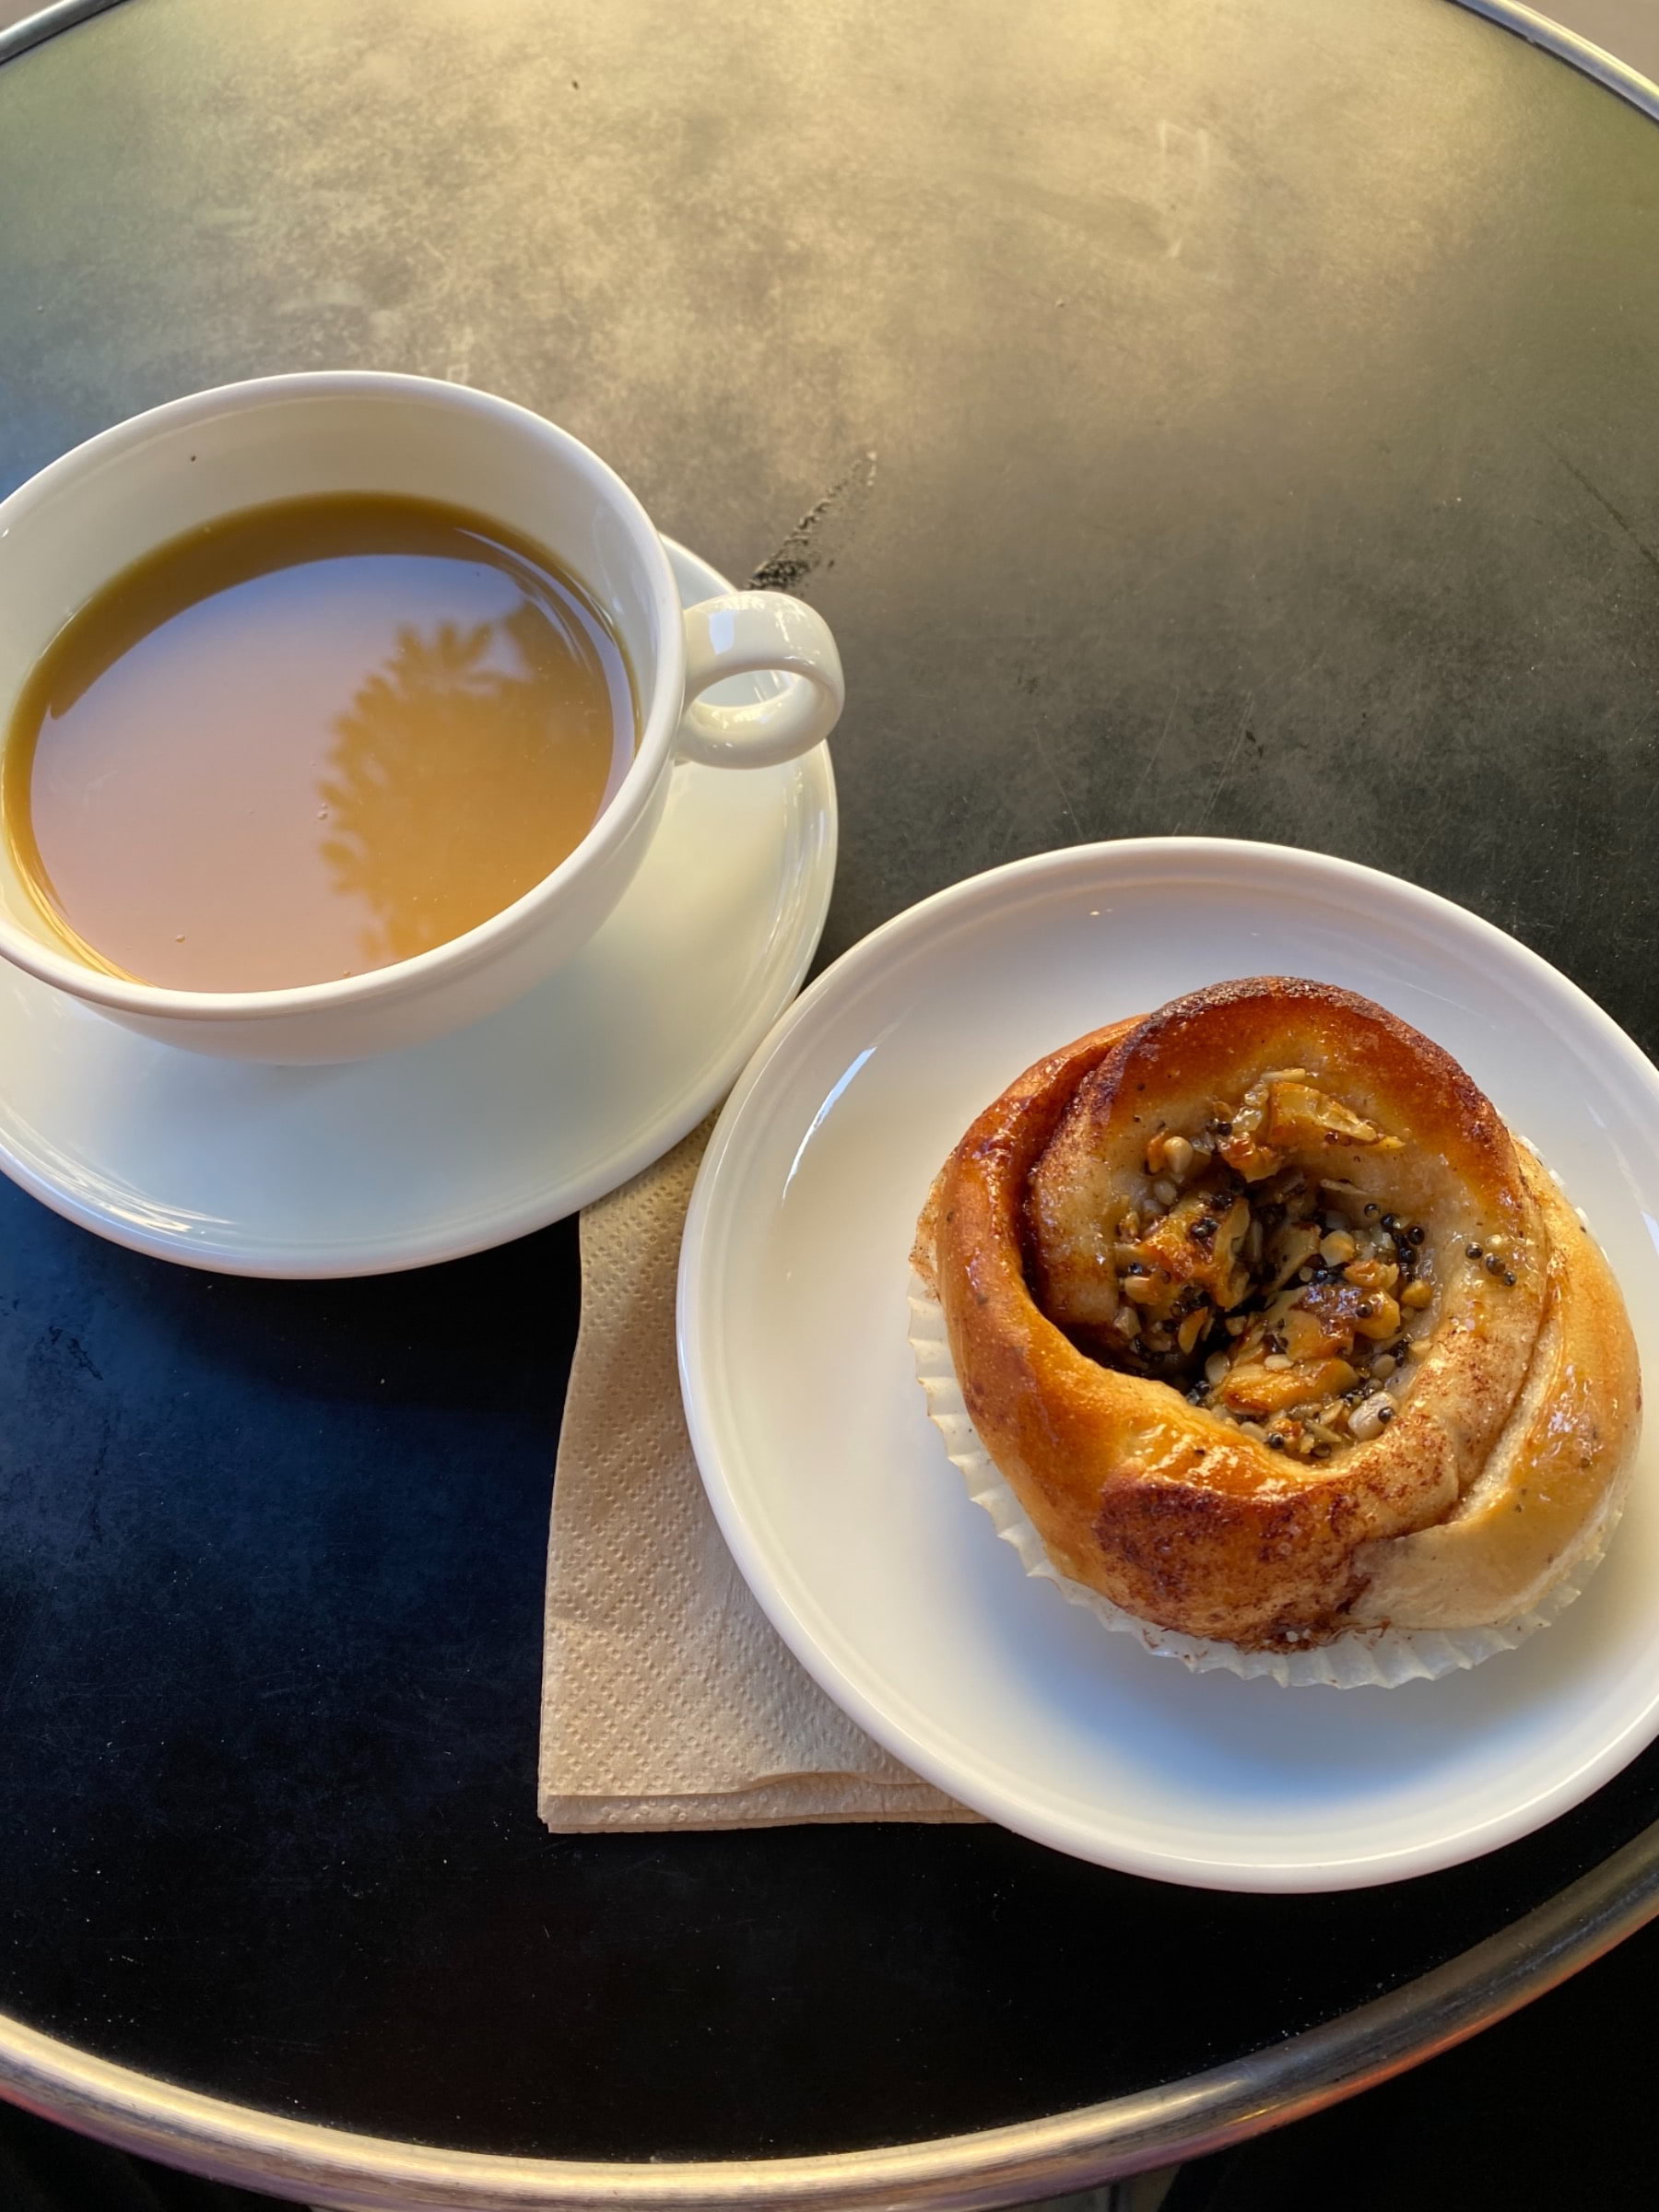 Kanelbulle med tosca – Photo from Bageri Petrus by Peter B. (08/09/2021)